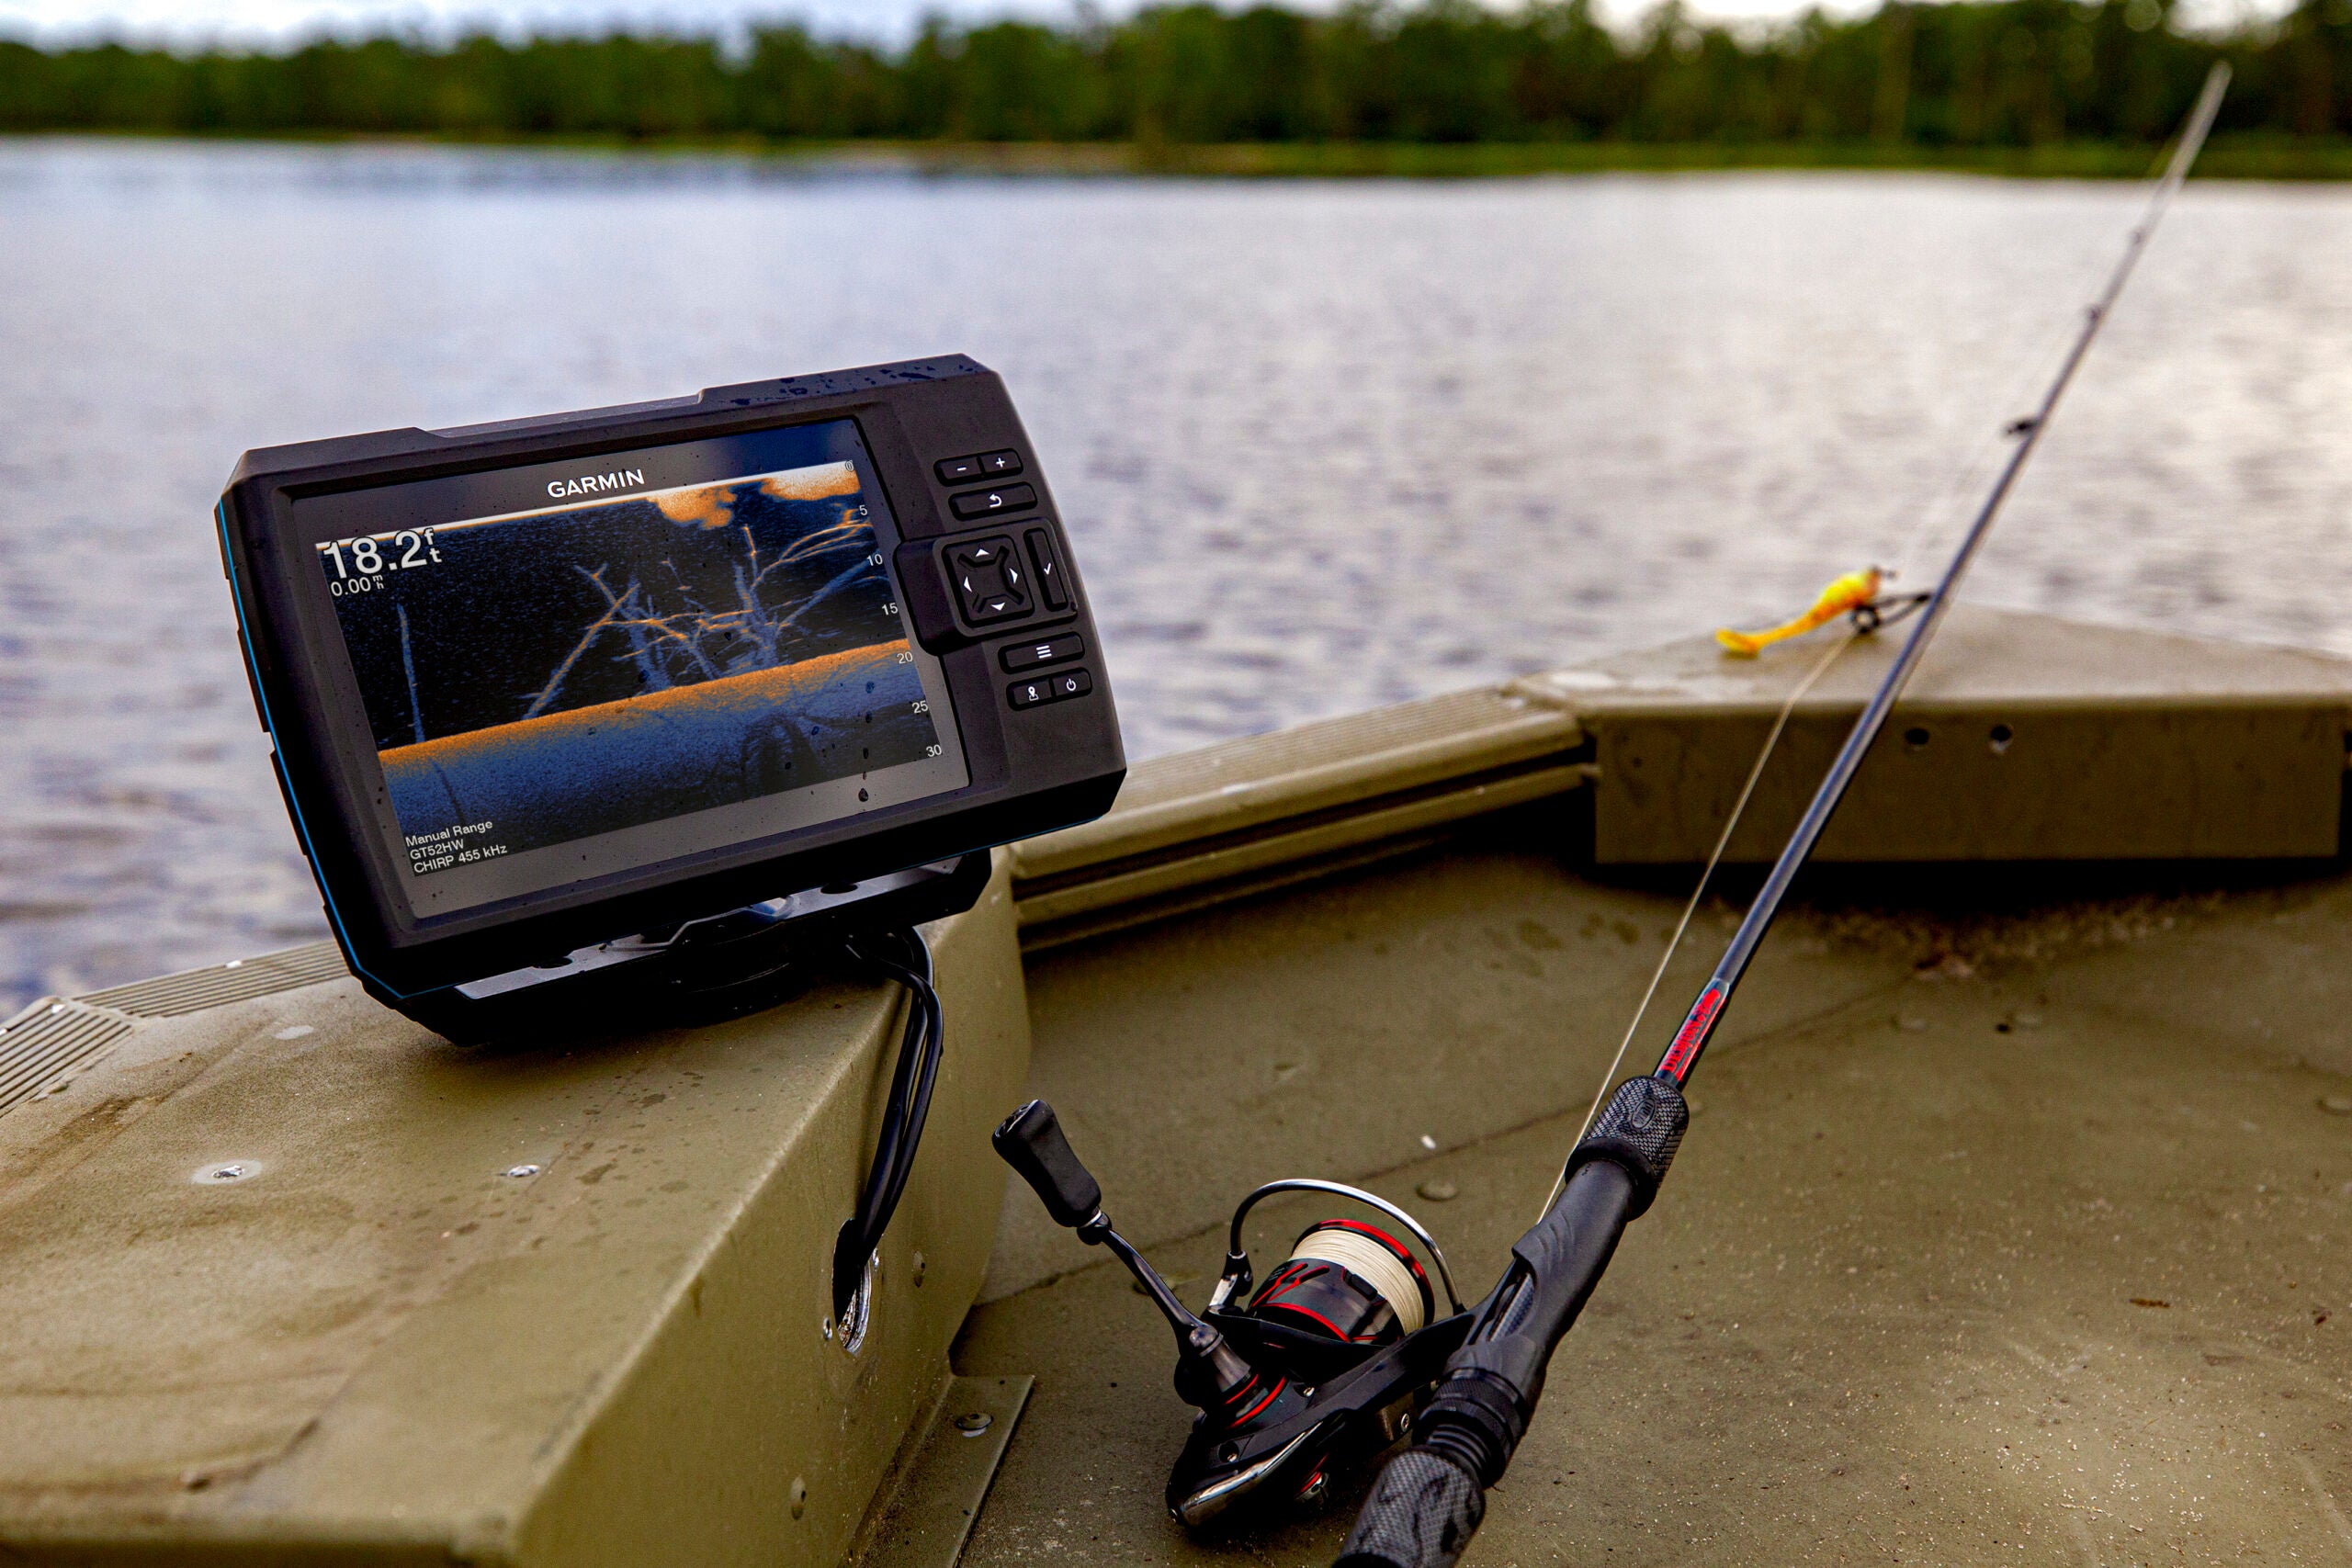 This Castable Fish Finder Is A Game Changer For Anglers—And It's